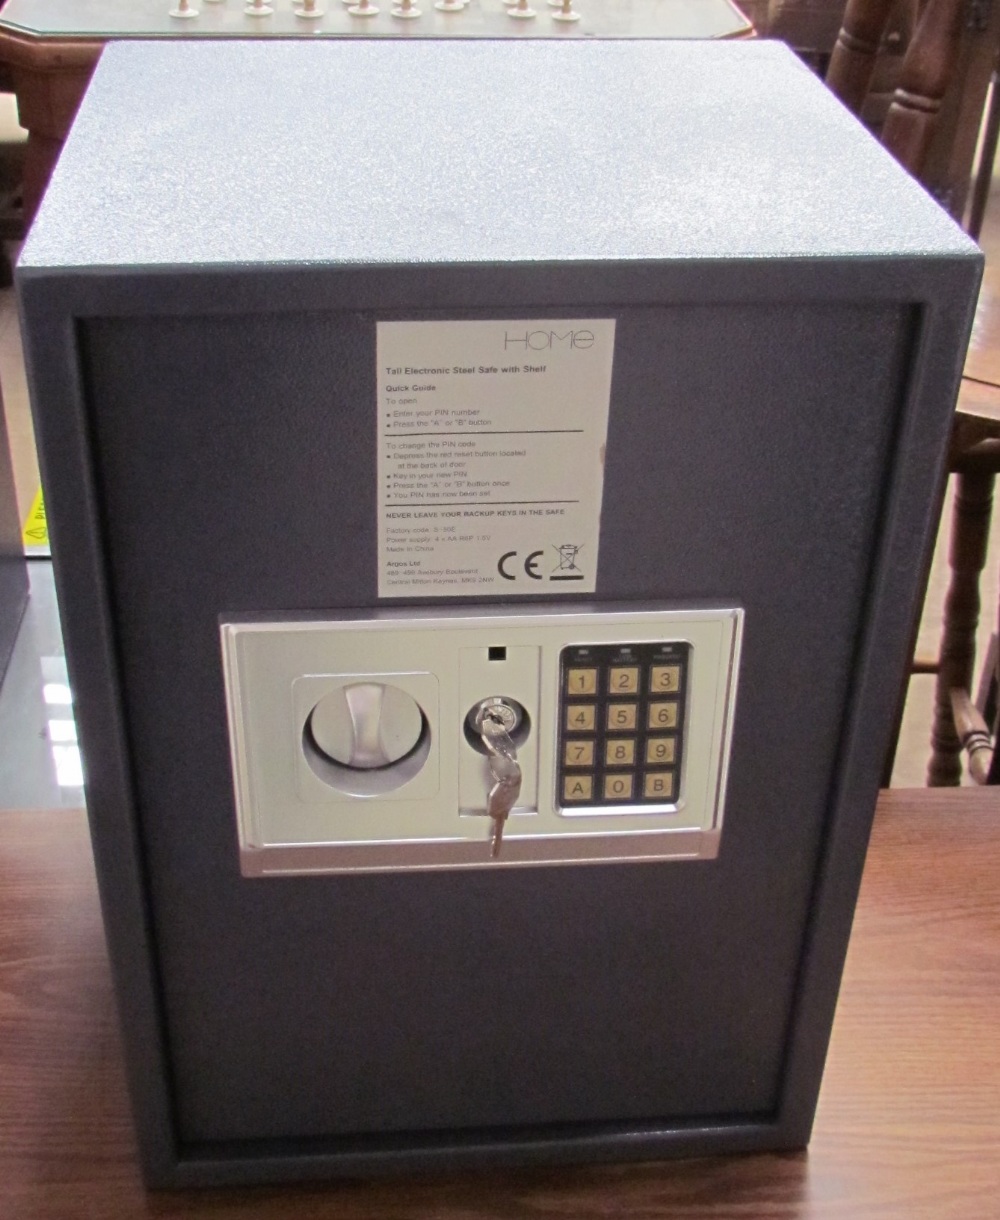 An Argos Home electronic safe with an key pad and override keys